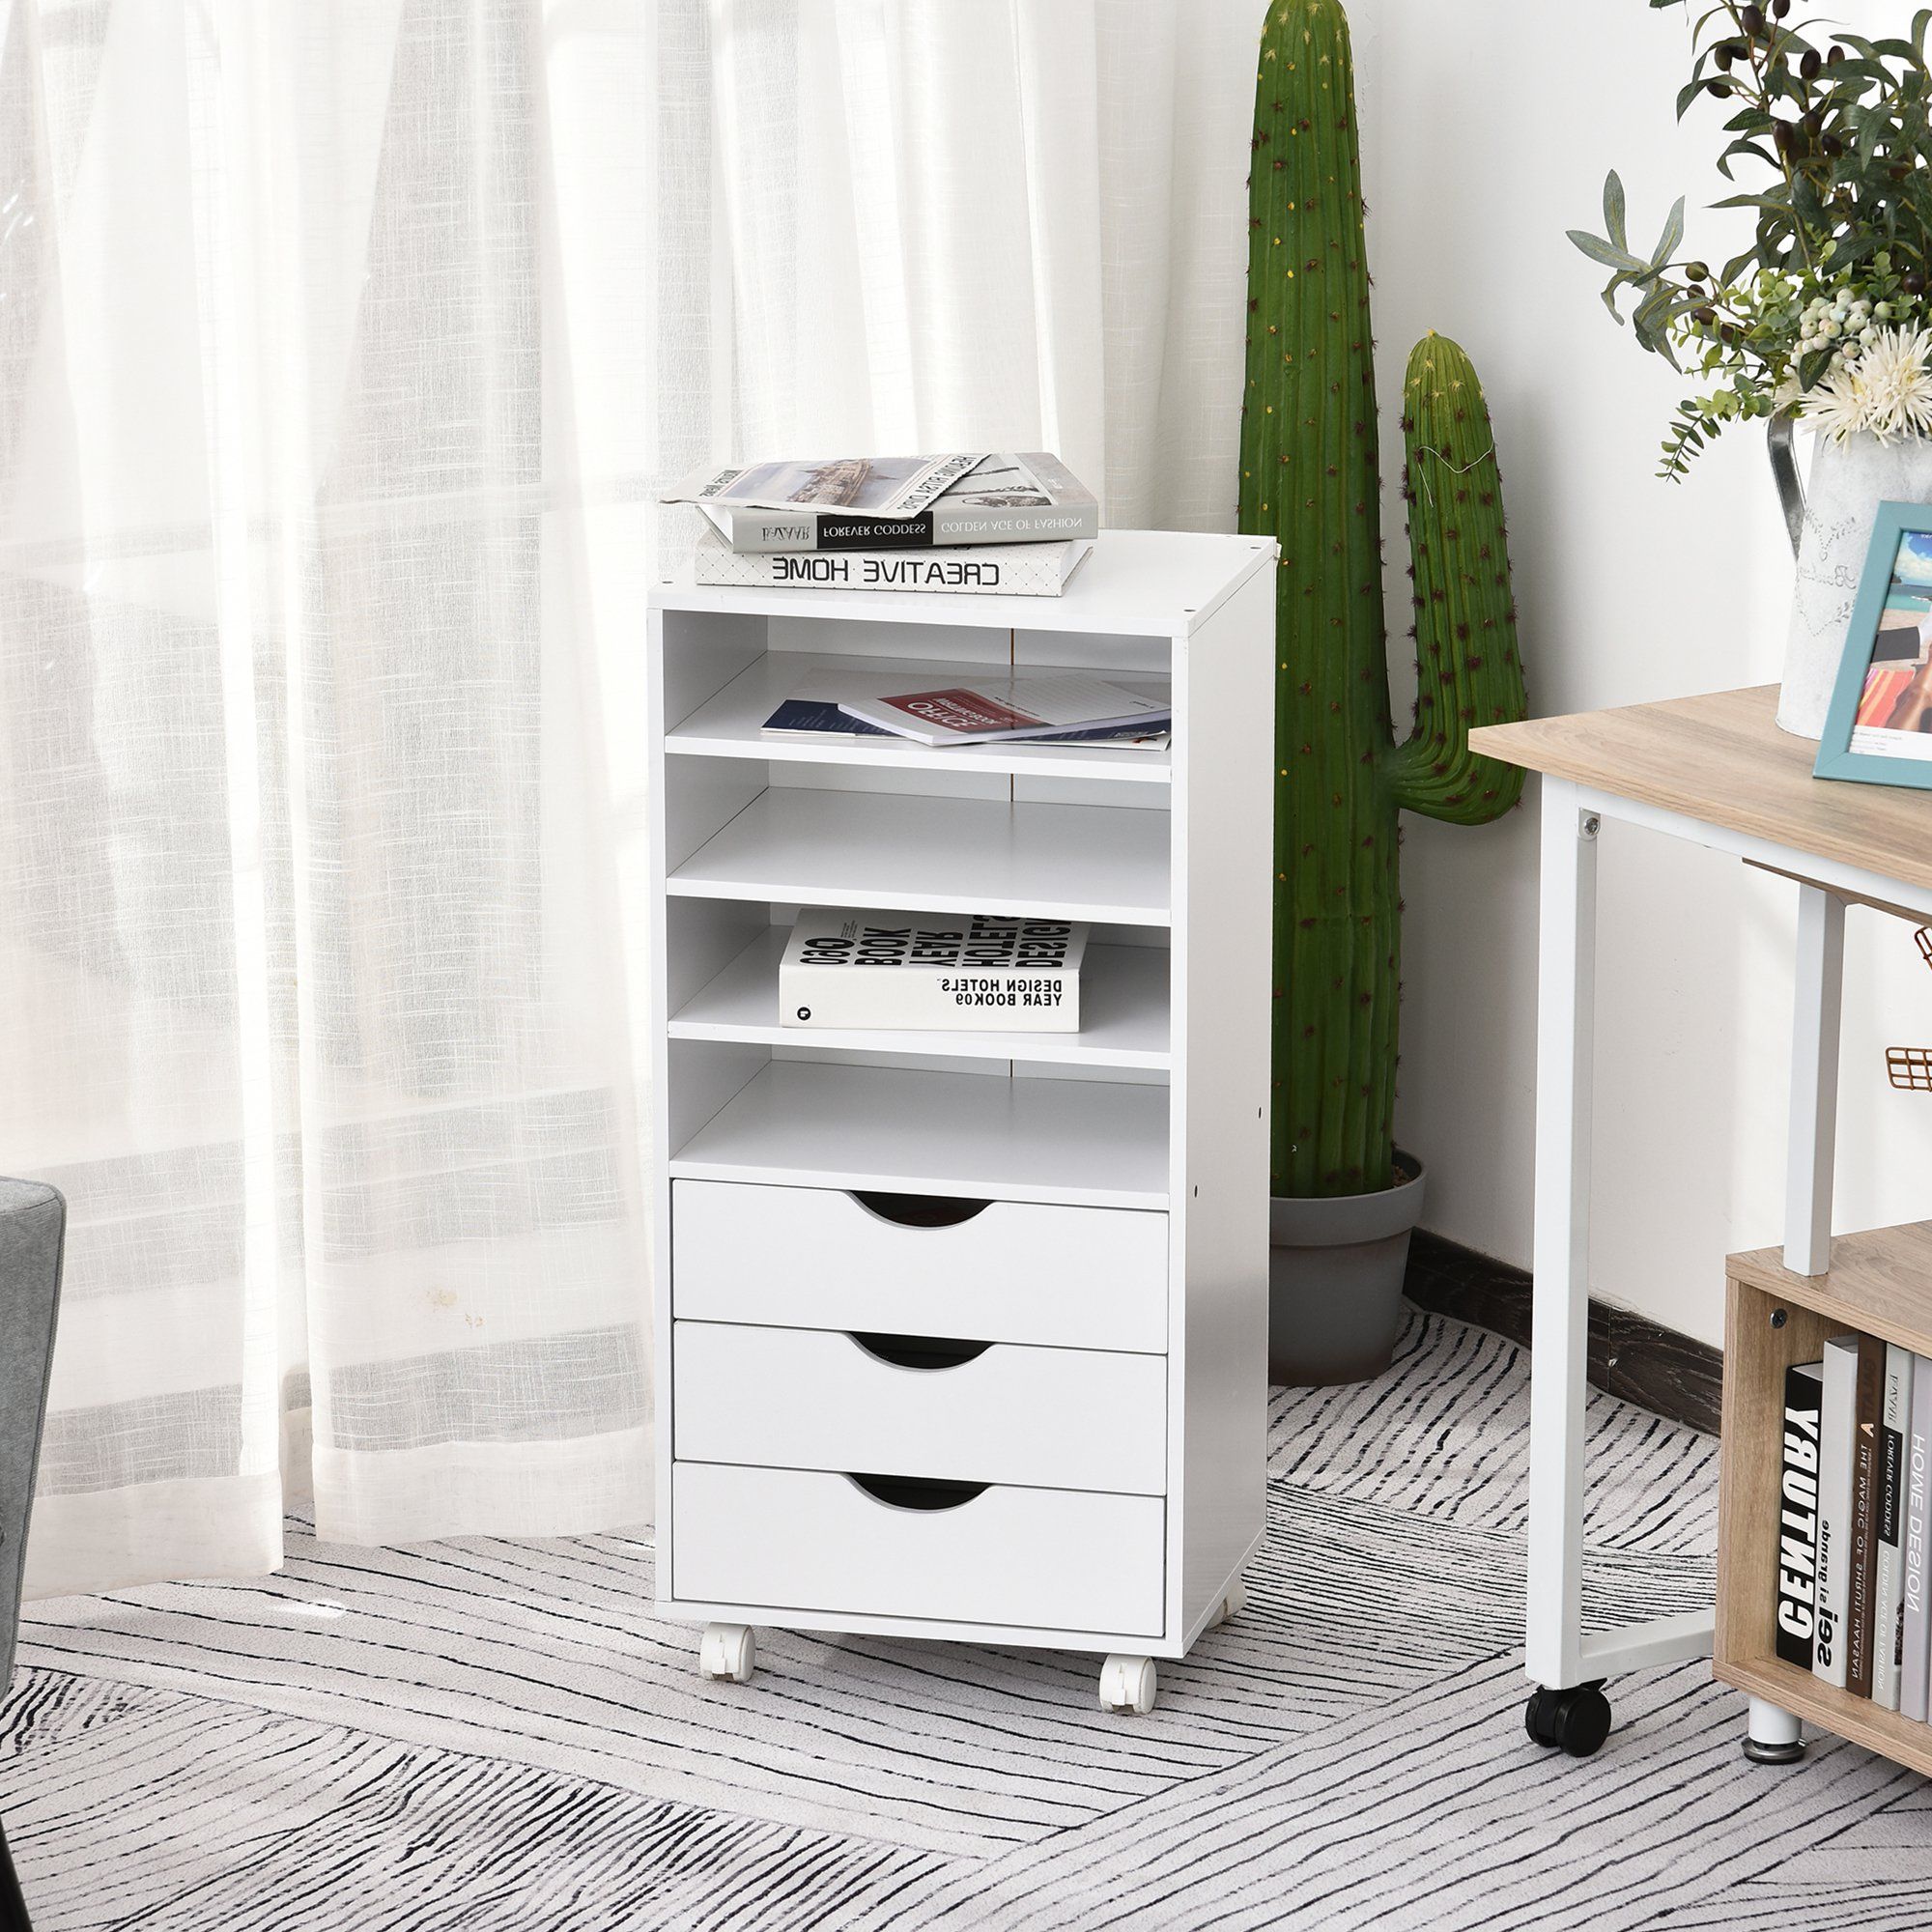 Matte White 3 Drawer Wood Desks Inside Widely Used Vinsetto 3 Drawers Wooden File Cabinet With 4 Caster Wheels 4 Open (View 13 of 15)